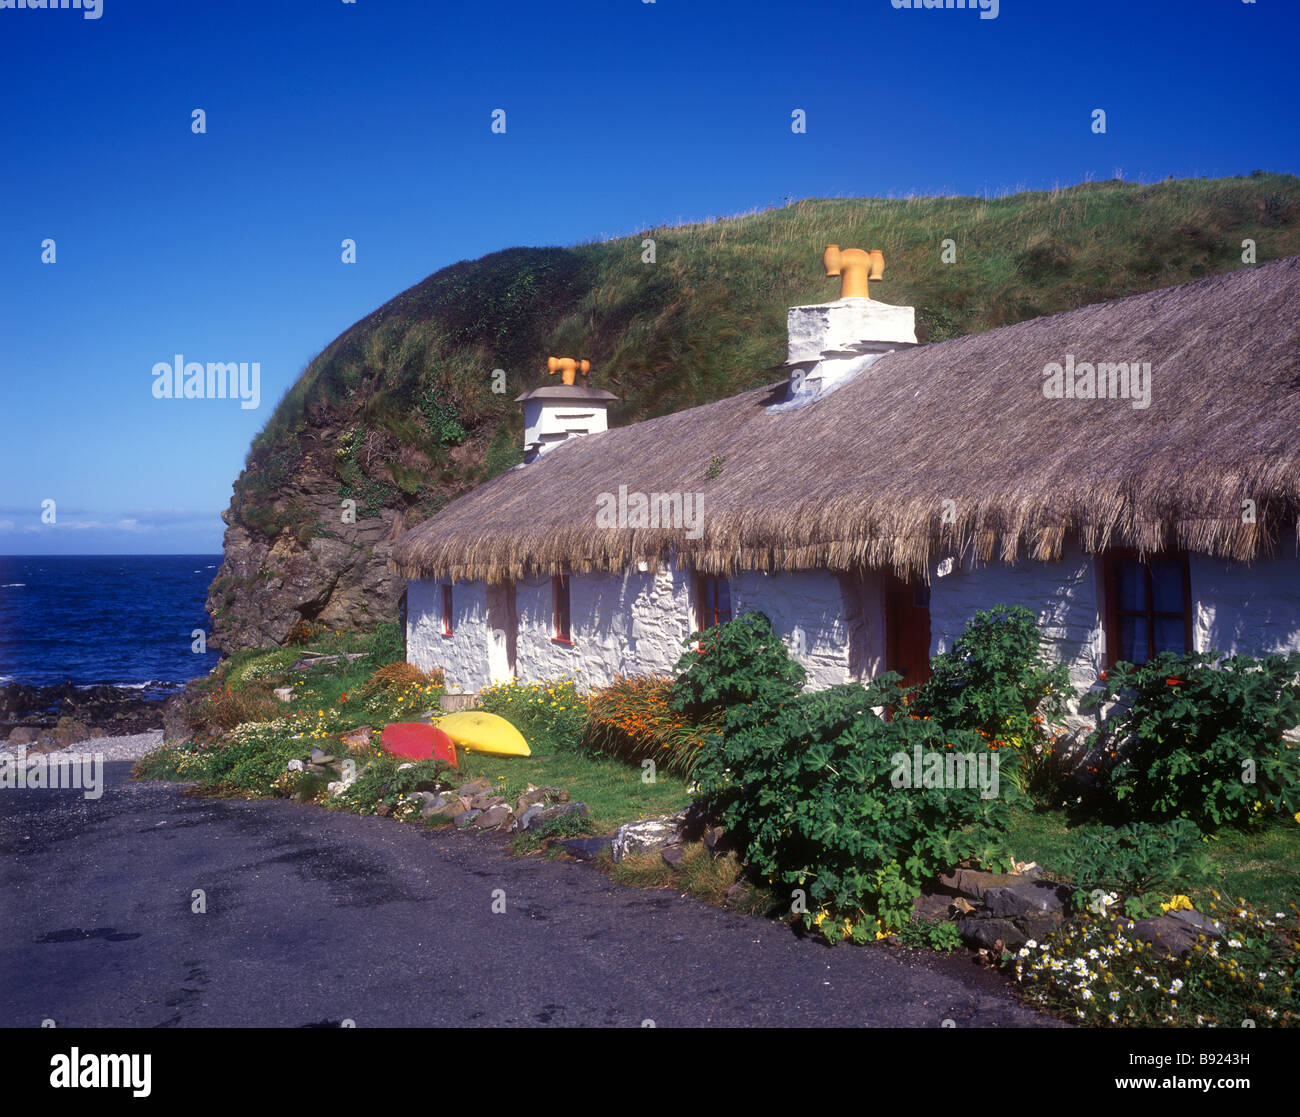 Picturesque old thatched cottage at Niarbyl Bay on the west coast of the island near Peel Stock Photo